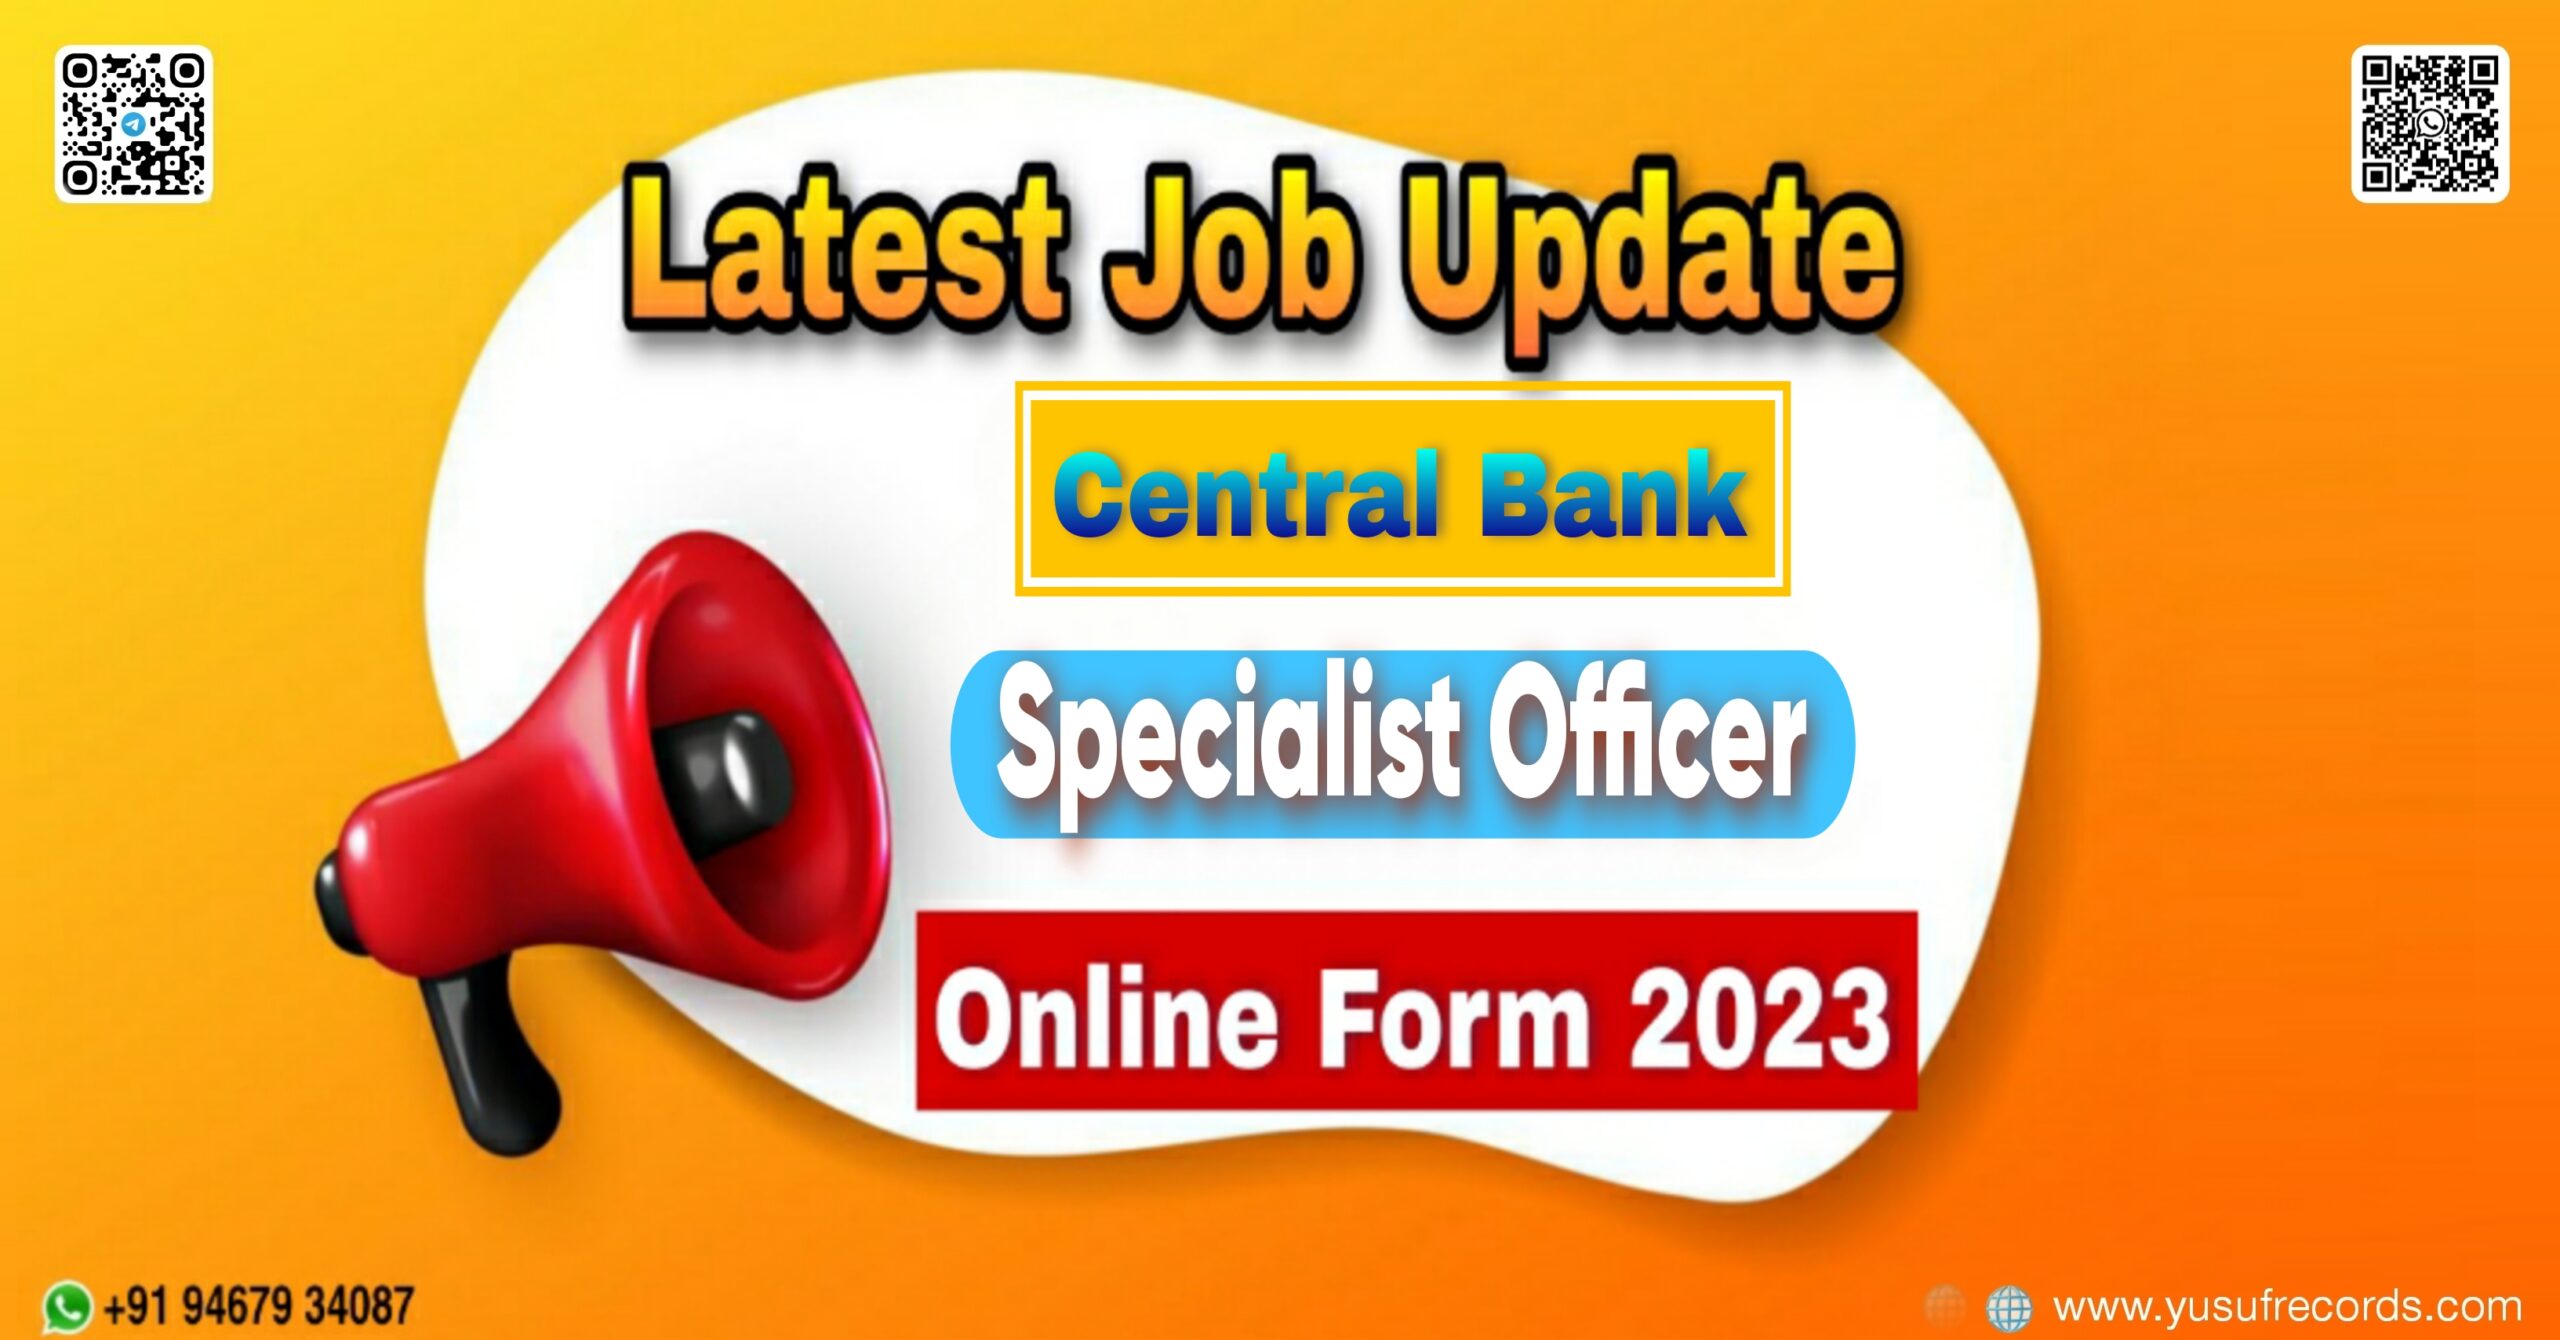 Central Bank Specialist Officer Recruitment 2023 yusufrecords.com